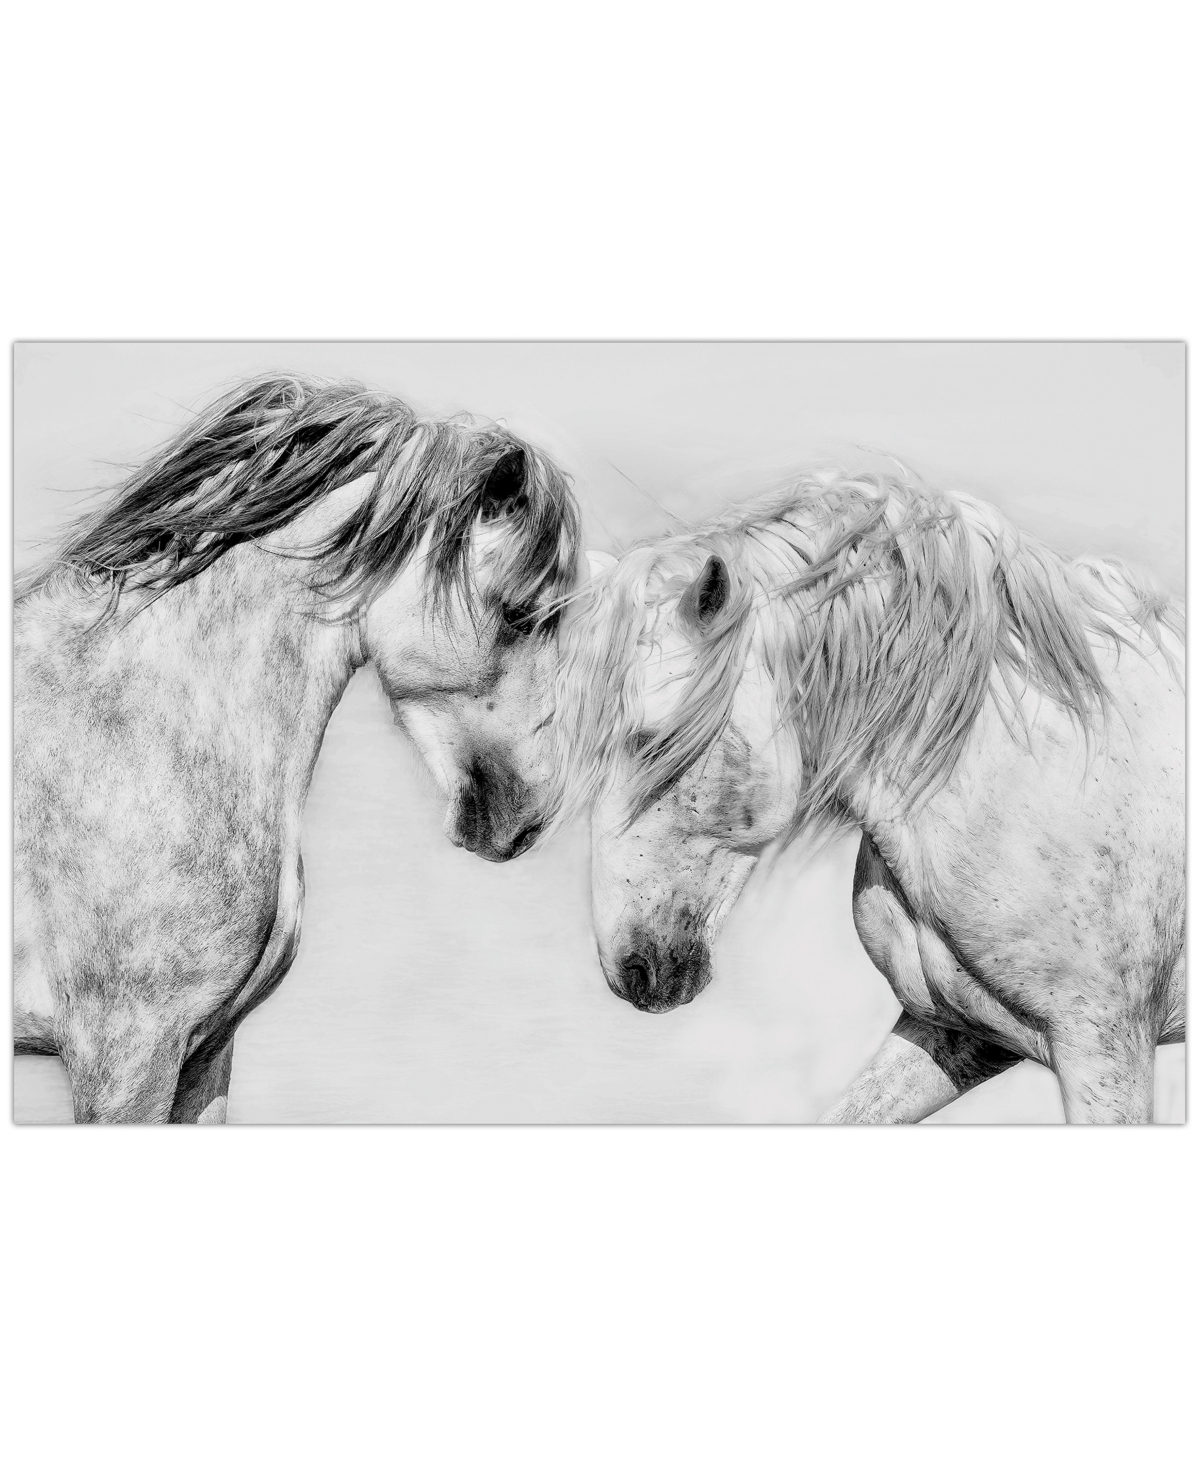 EMPIRE ART DIRECT "CABALLO BLANCO EQUINE" FRAMELESS FREE FLOATING TEMPERED GLASS PANEL GRAPHIC WALL ART, 32" X 48" X 0